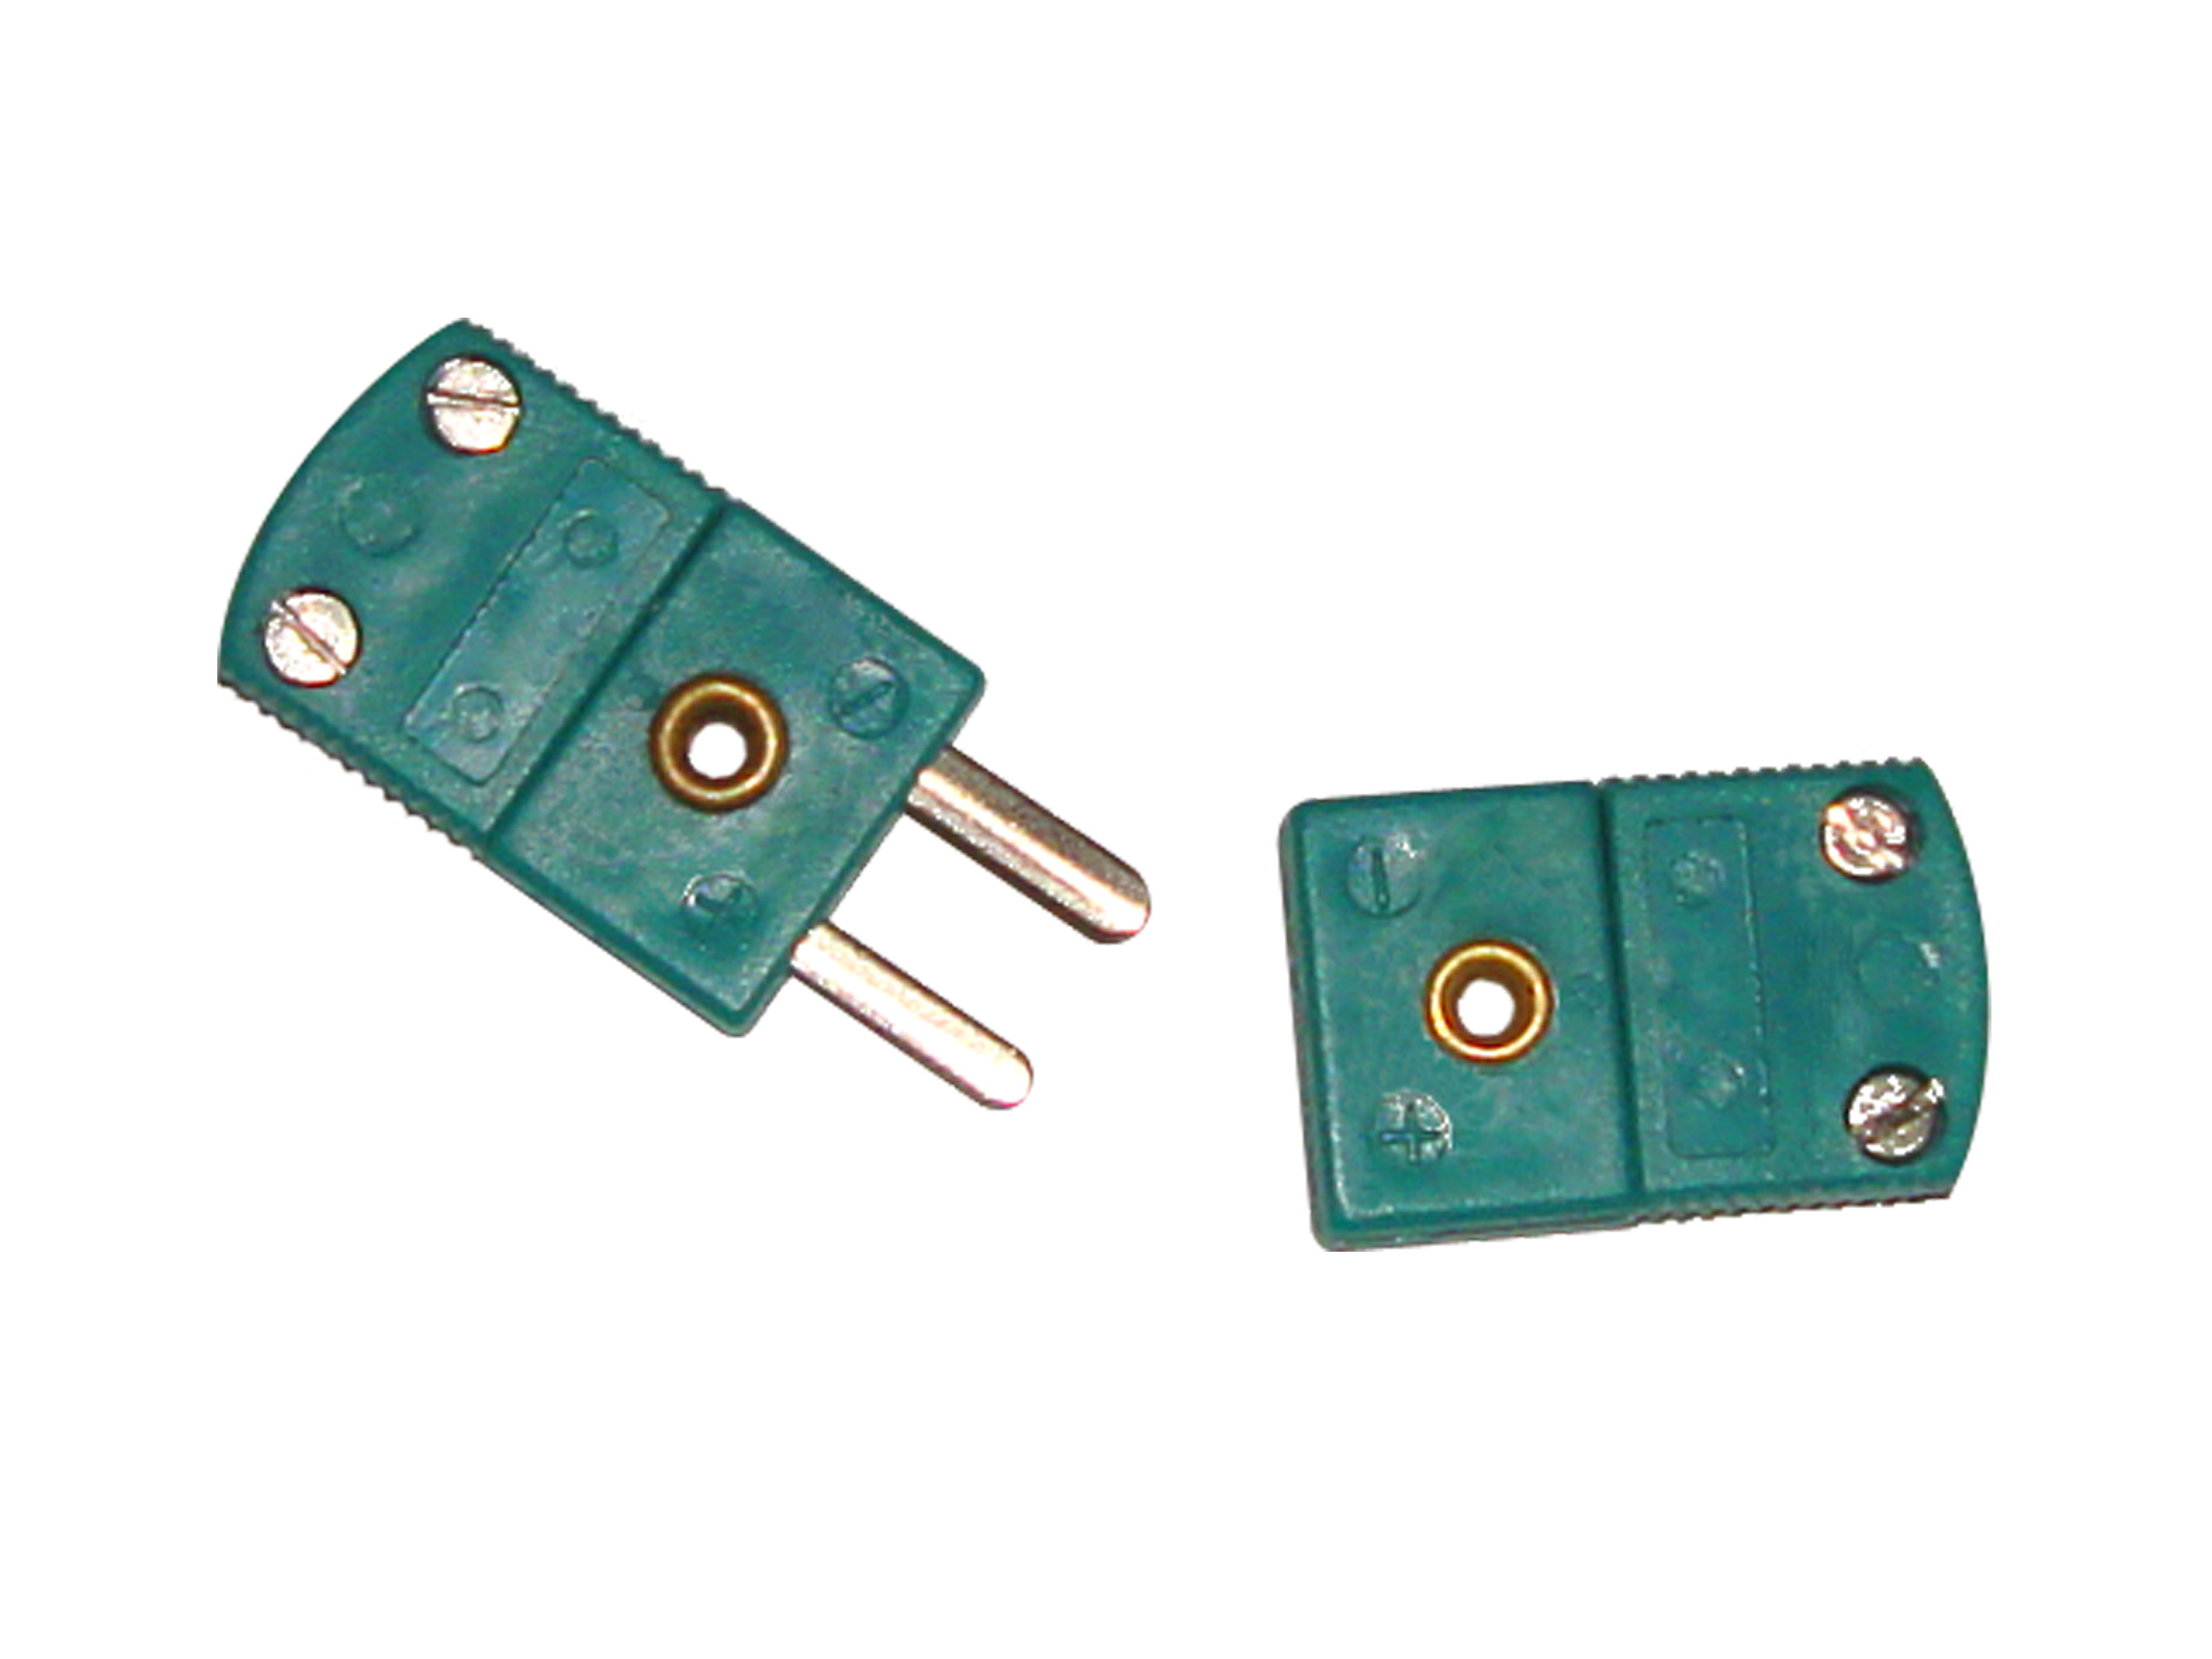 Thermocouple connector